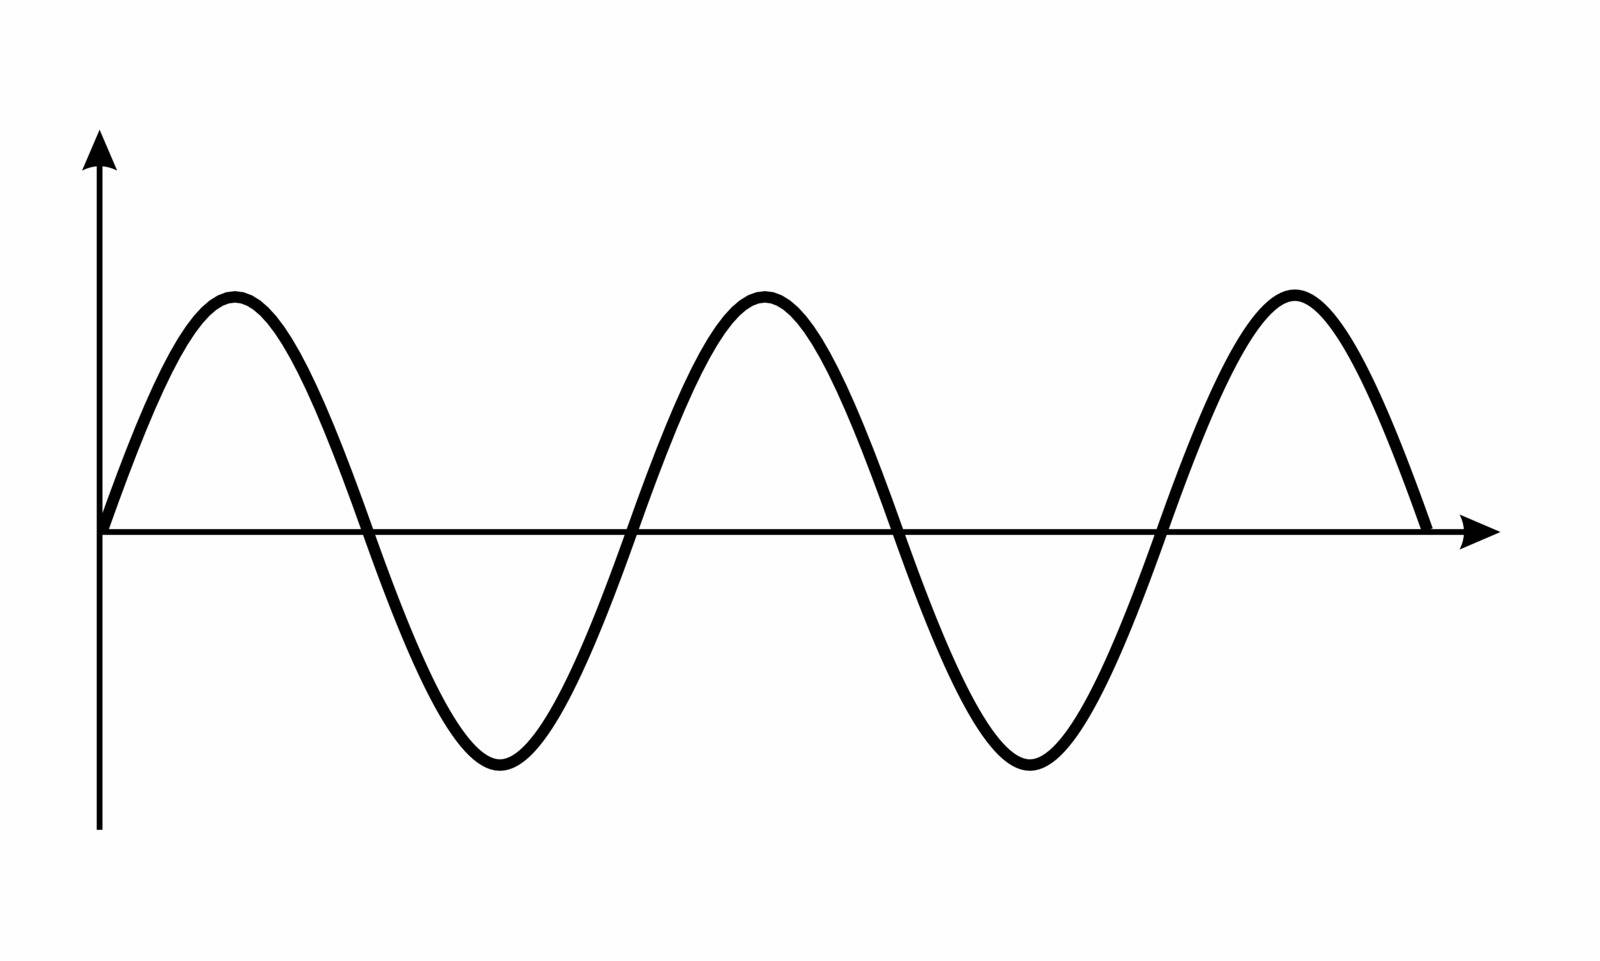 A wavy graph representing a mathematical function